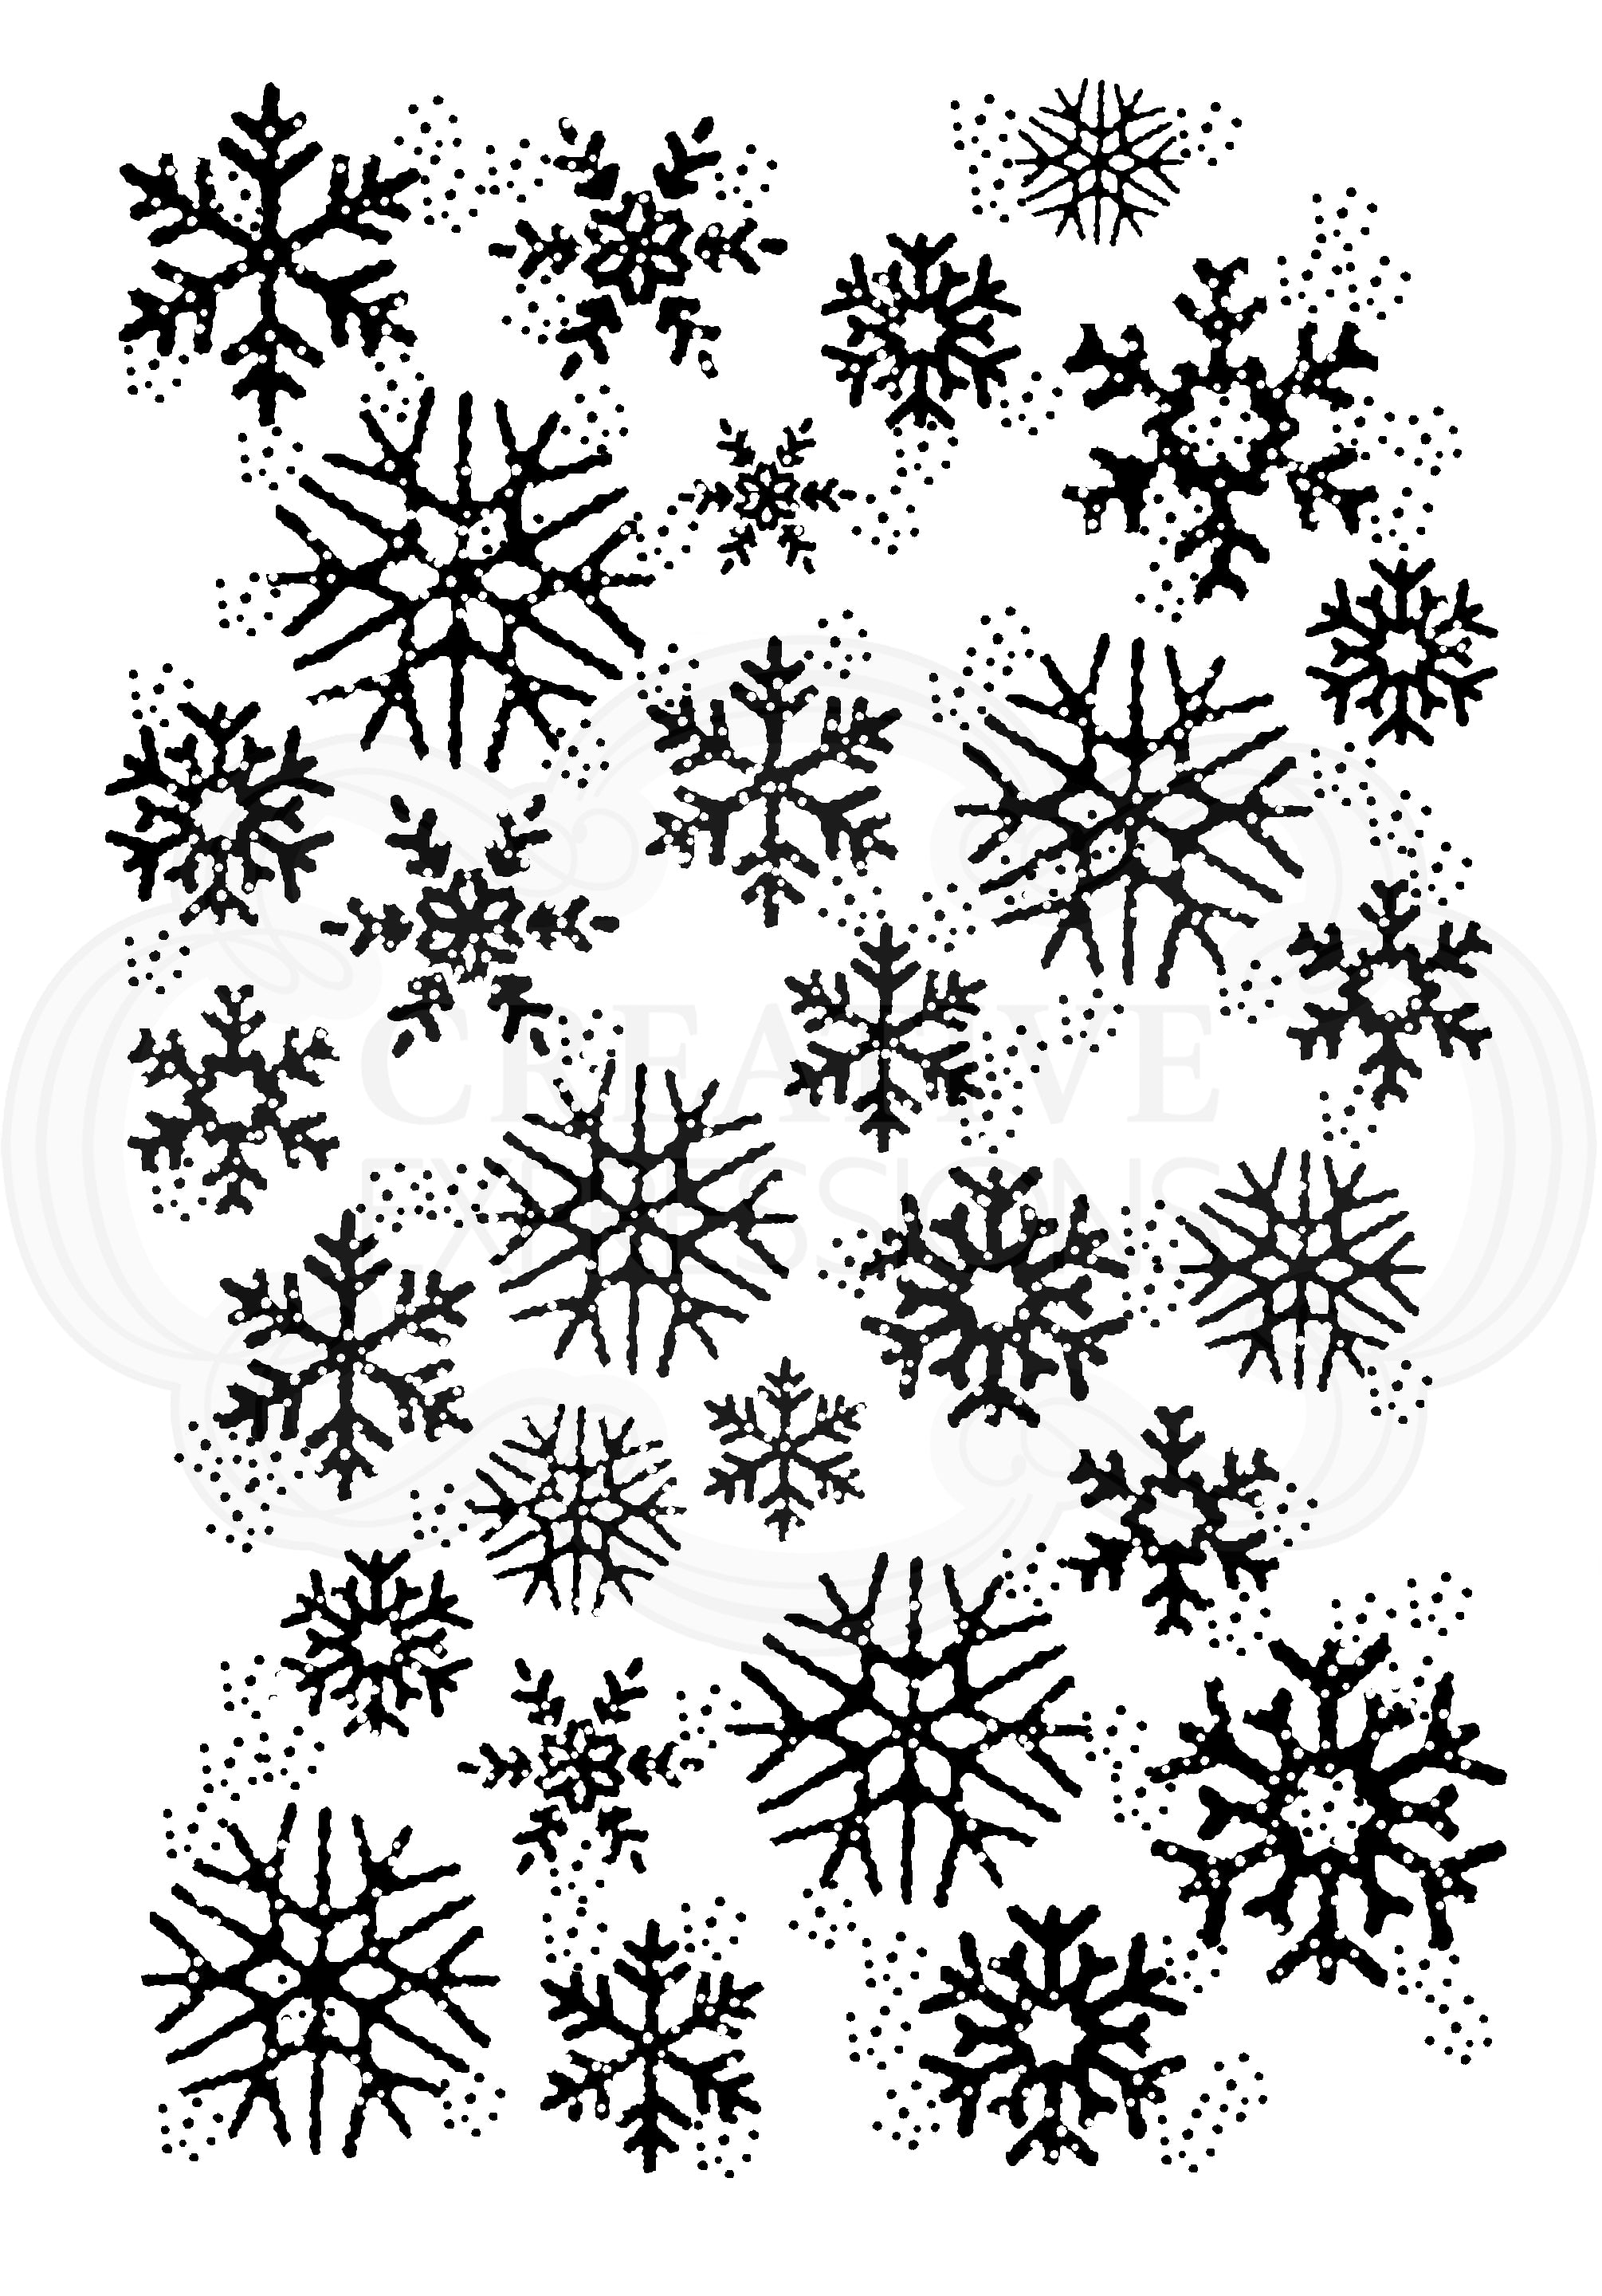 Woodware Clear Singles Snowflake Flurry 3.8 in x 2.6 in Stamp